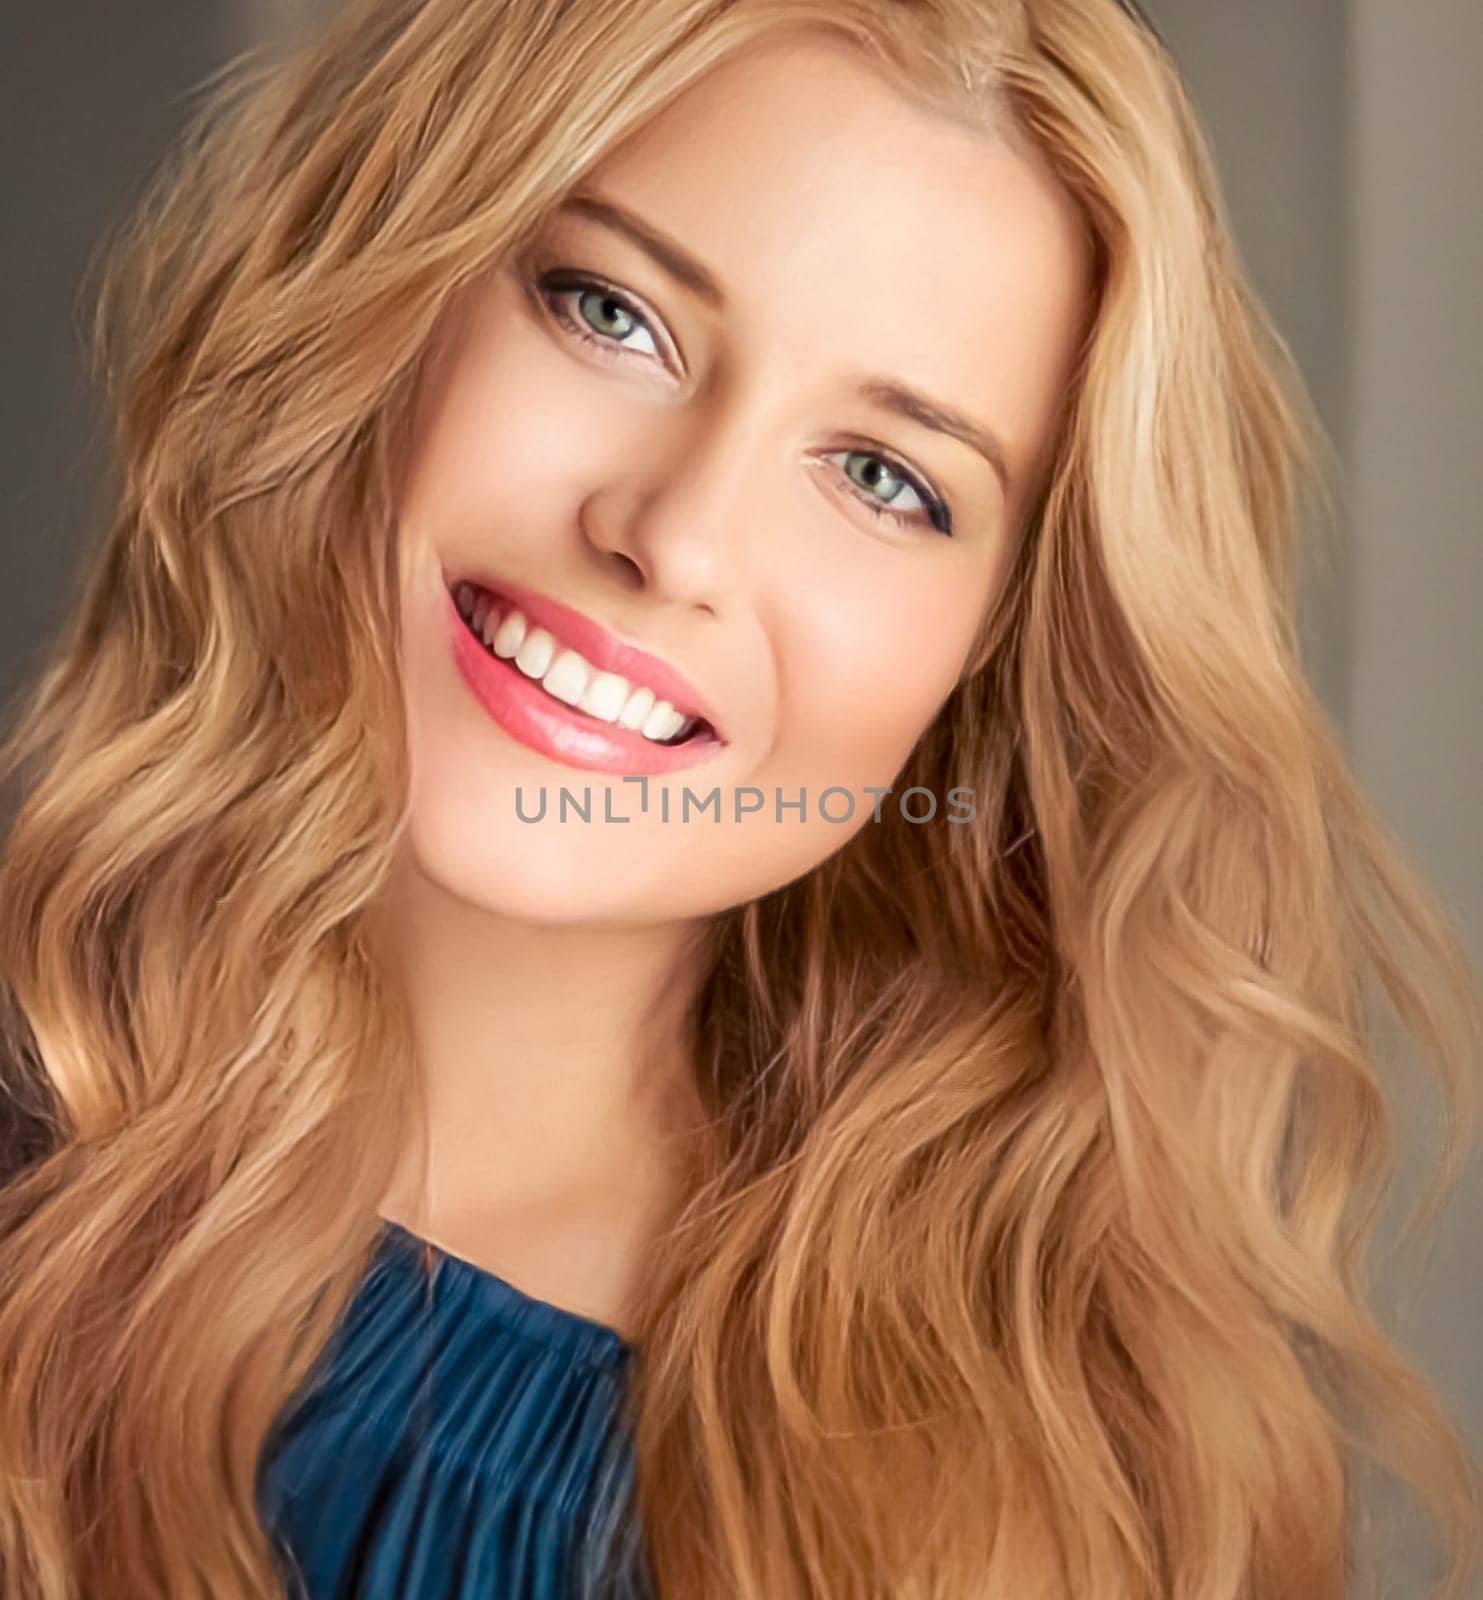 Beauty and femininity, beautiful blonde woman with long blond hair smiling, natural portrait by Anneleven